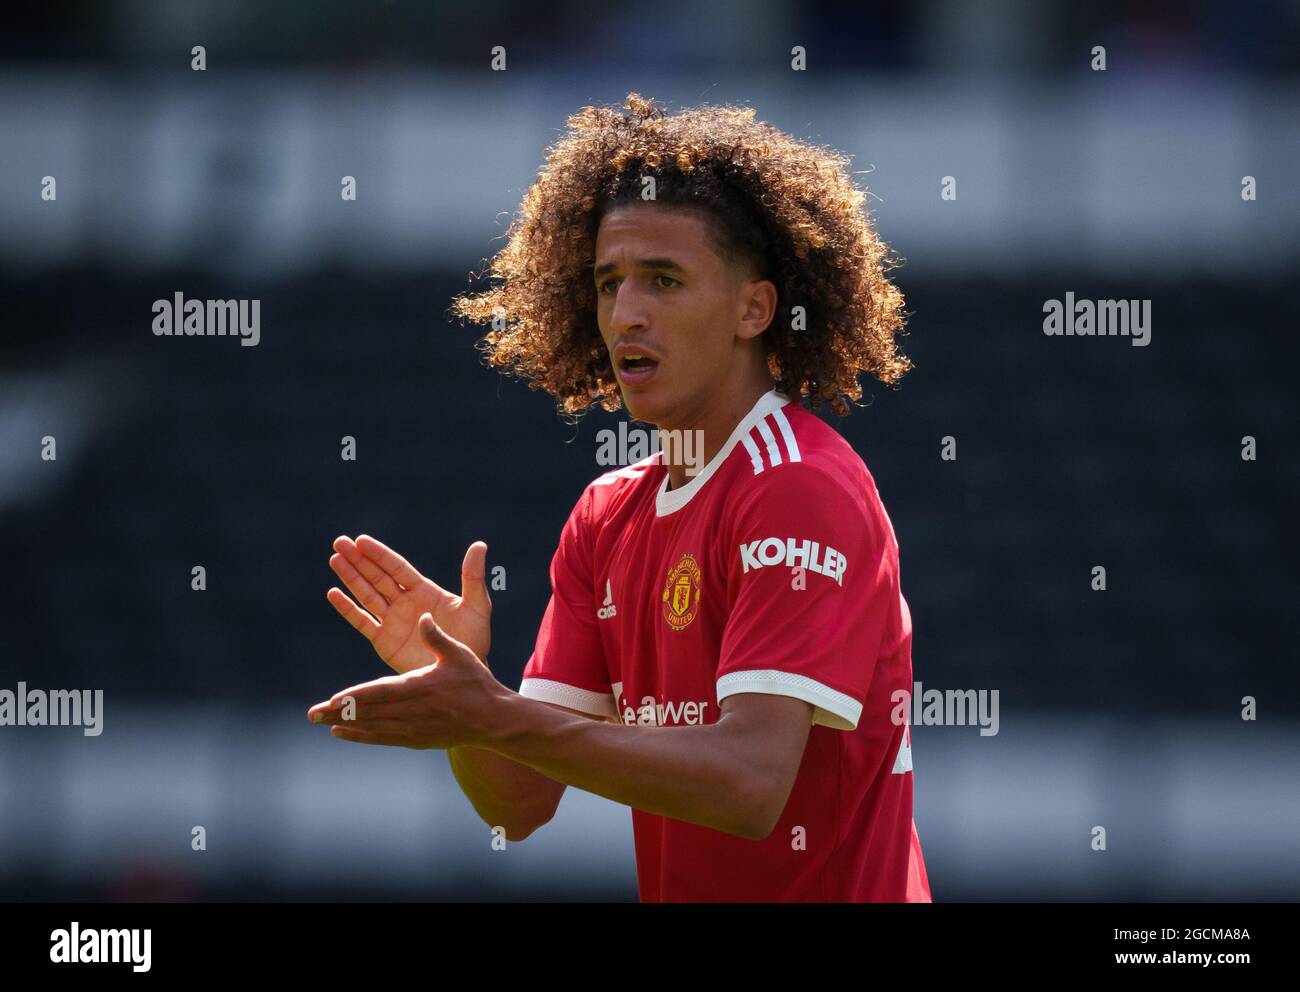 Derby, UK. 18th July, 2021. Hannibal Mejbri of Man Utd during the 2021/22 Pre Season Friendly match between Derby County and Manchester United at the Ipro Stadium, Derby, England on 18 July 2021. Photo by Andy Rowland. Credit: PRiME Media Images/Alamy Live News Stock Photo